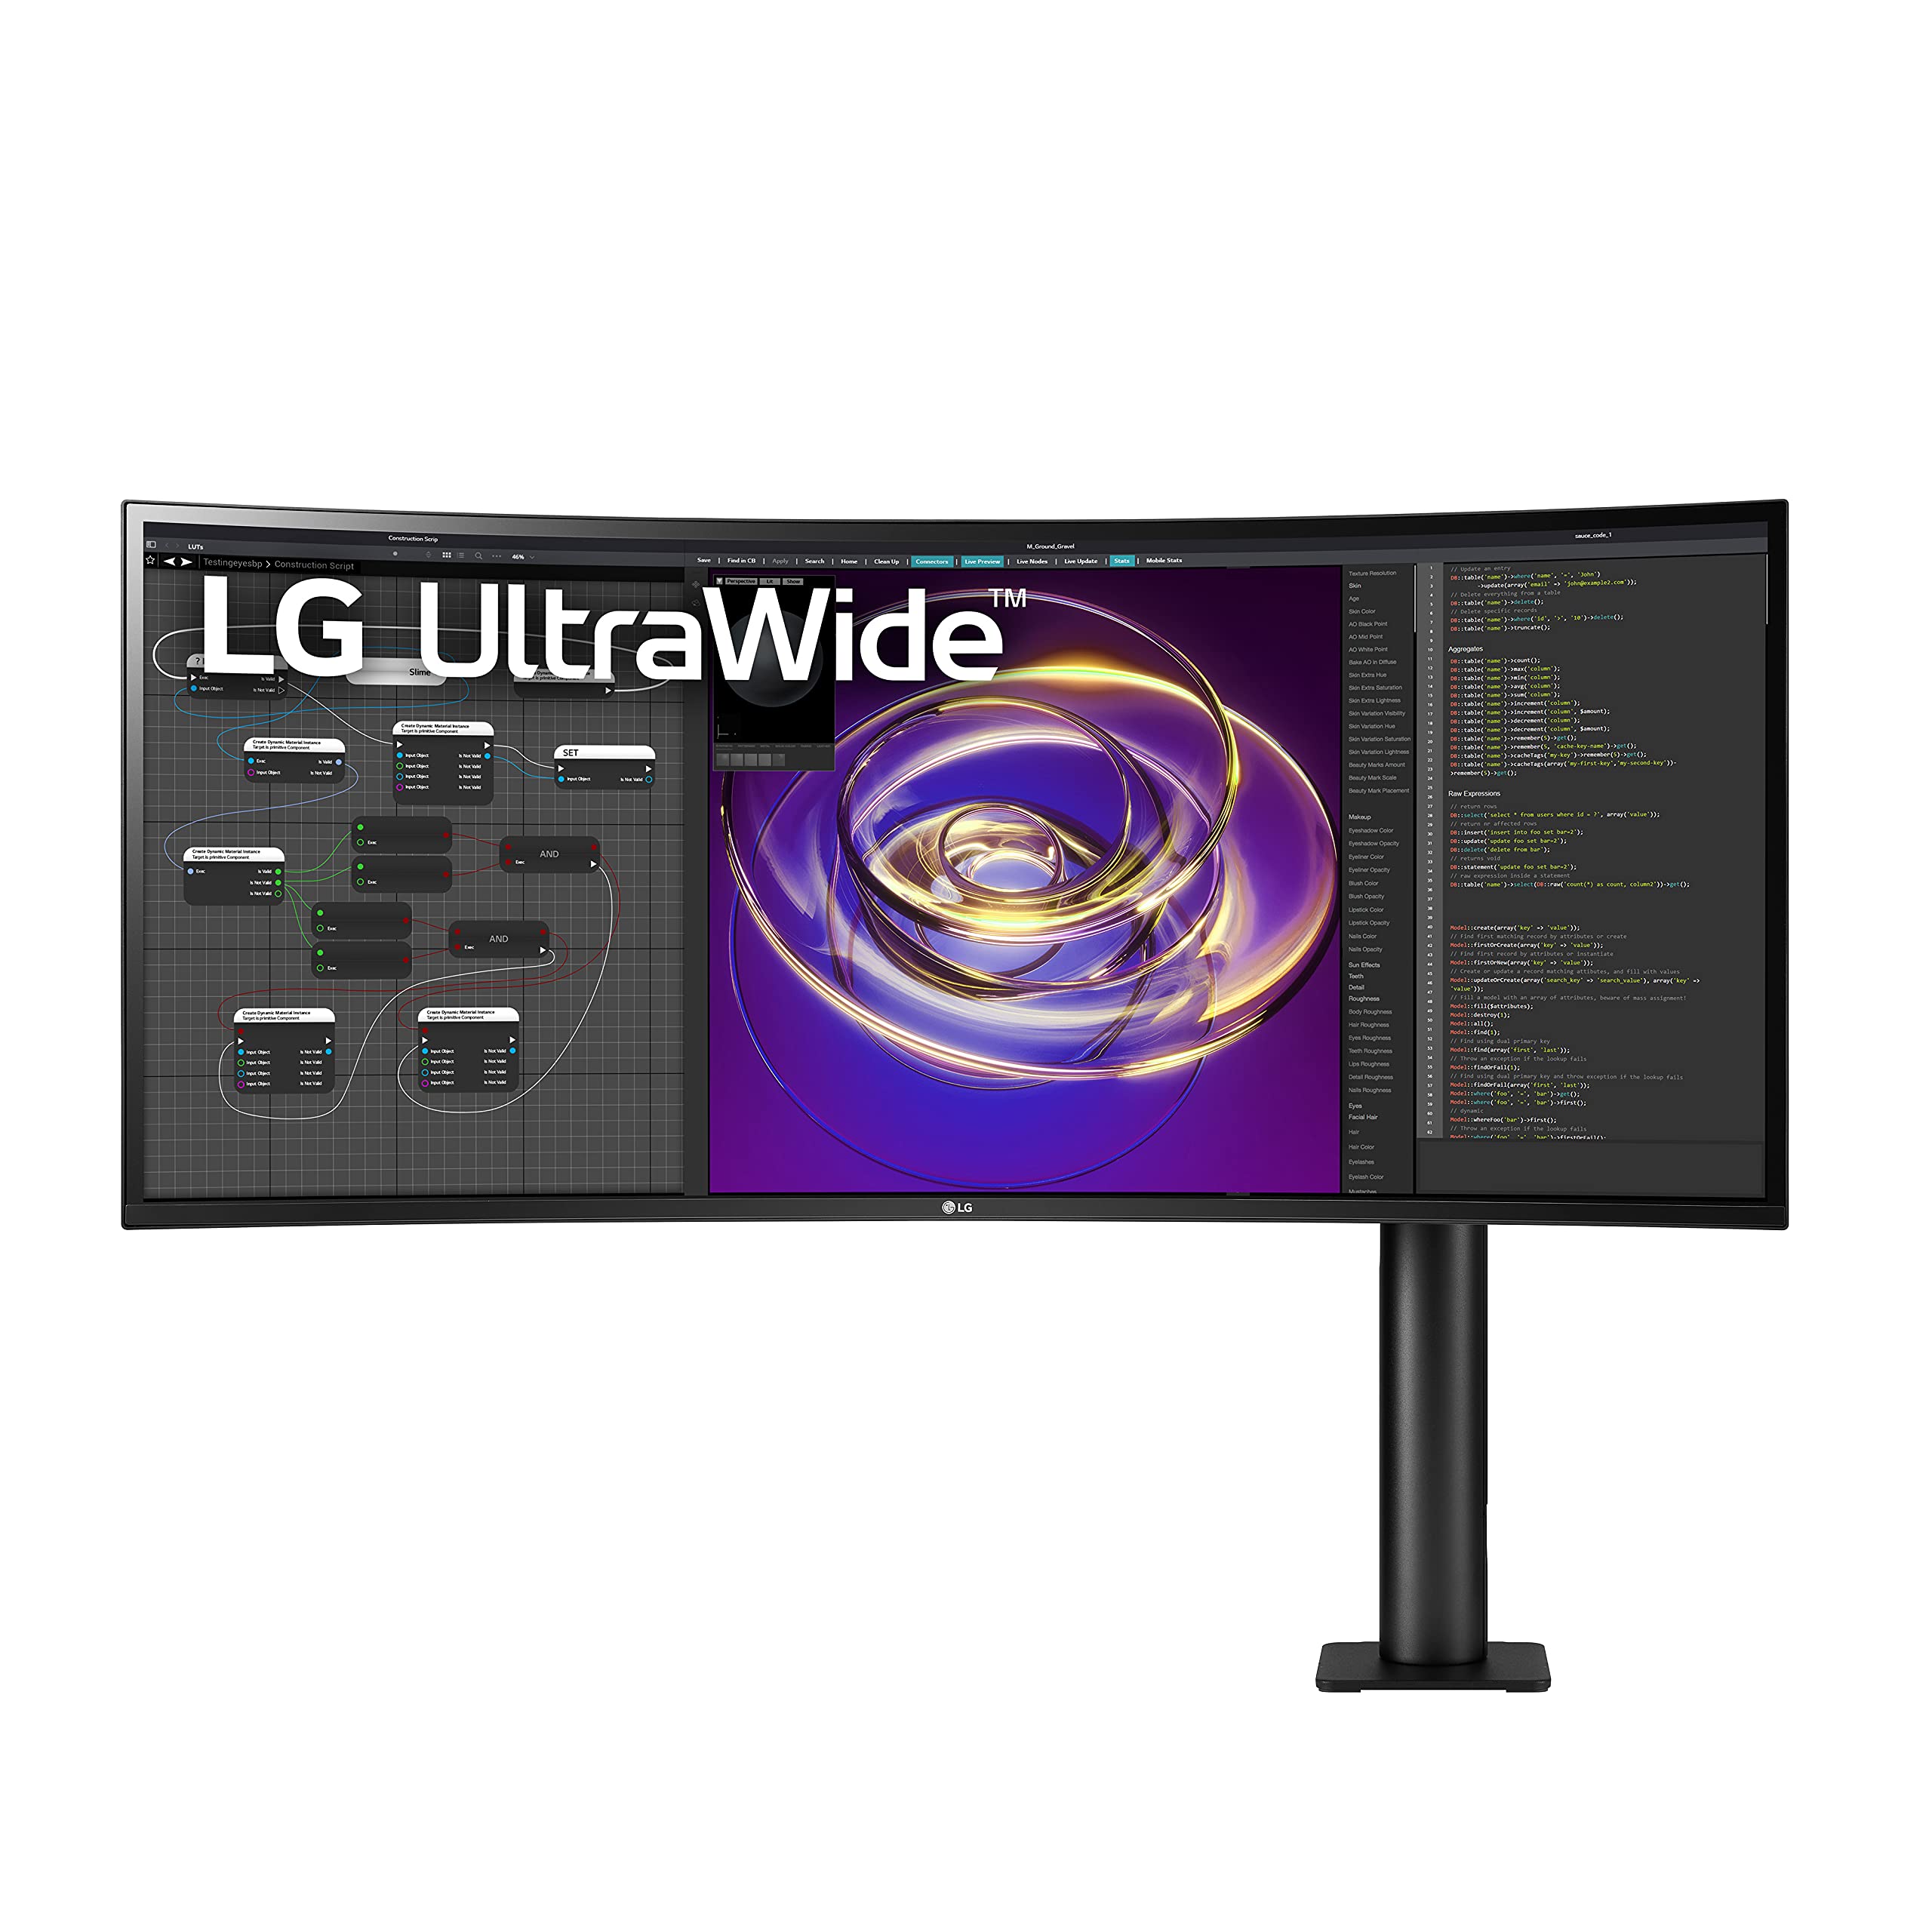 LG 34WP88C-B 34-inch Curved 21:9 UltraWide QHD (3440x1440) IPS Display with Ergo Stand (Extend/Retract/Swivel/Height/Tilt), USB Type C (90W Power delivery), DCI-P3 95% Color Gamut with HDR 10